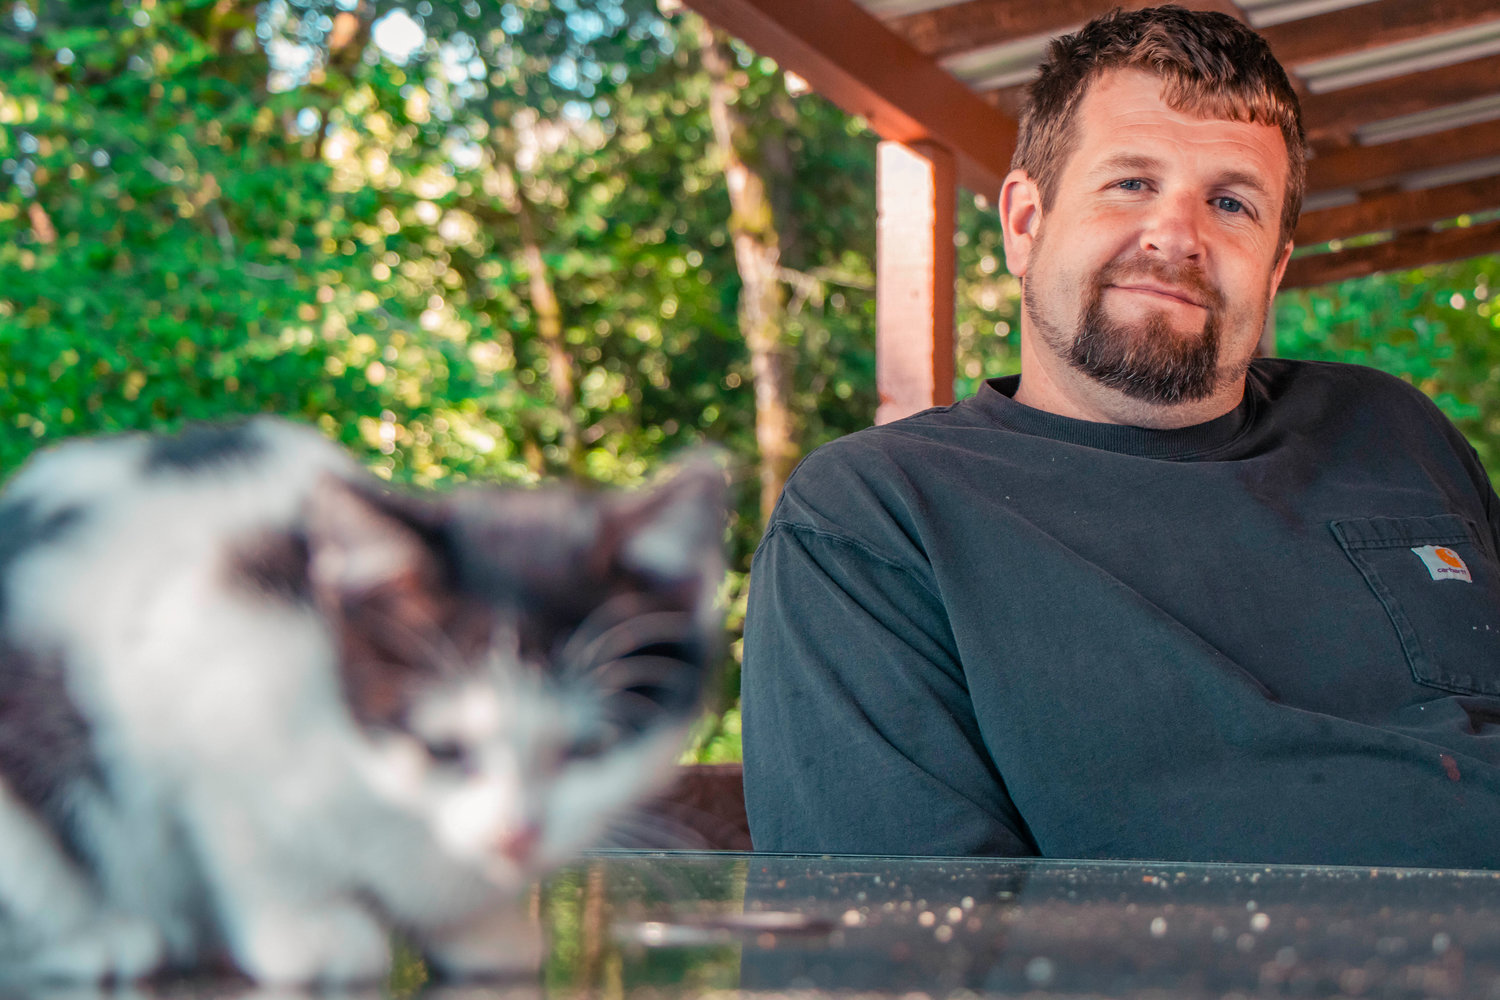 Blake Bennett smiles as he watches a kitten play on an outdoor table Thursday morning at his Salkum residence.